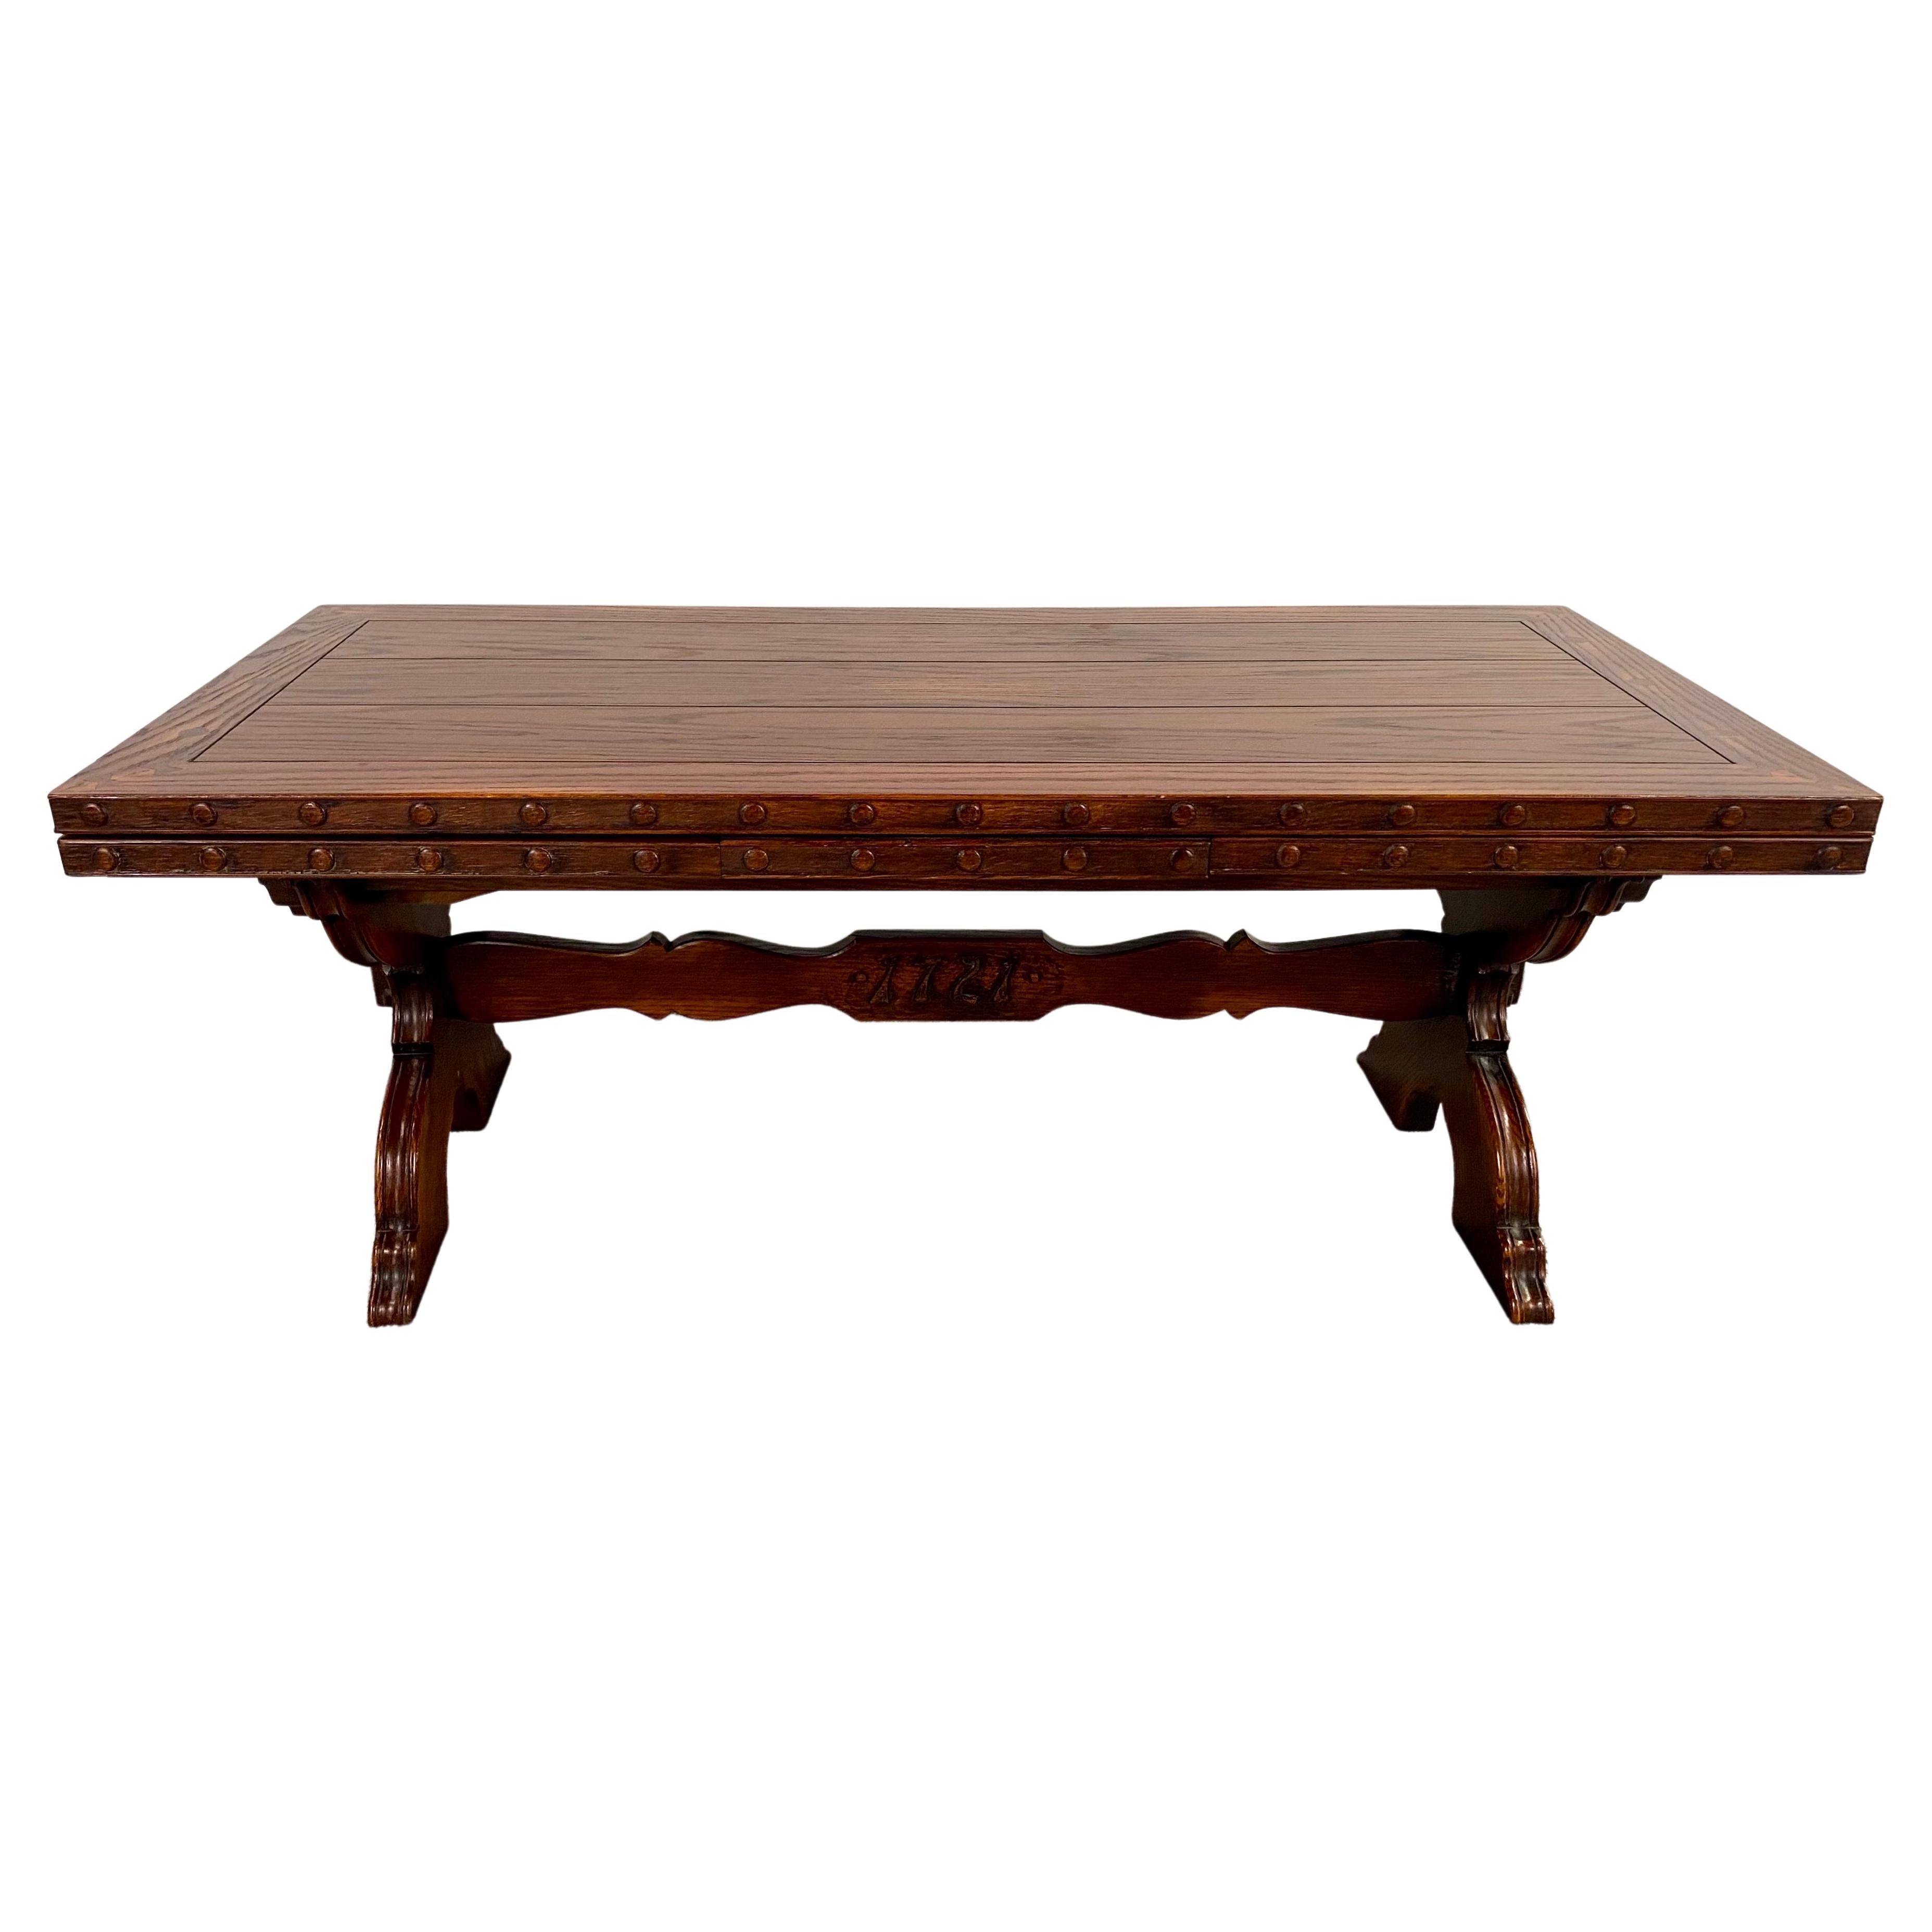 A rare antique 18th Century regency style coffee or cocktail table. A statement of craftsmanship, the table is made of rosewood showing beautiful surface grain. The table features two side extension leaves for more space to be used as a serving